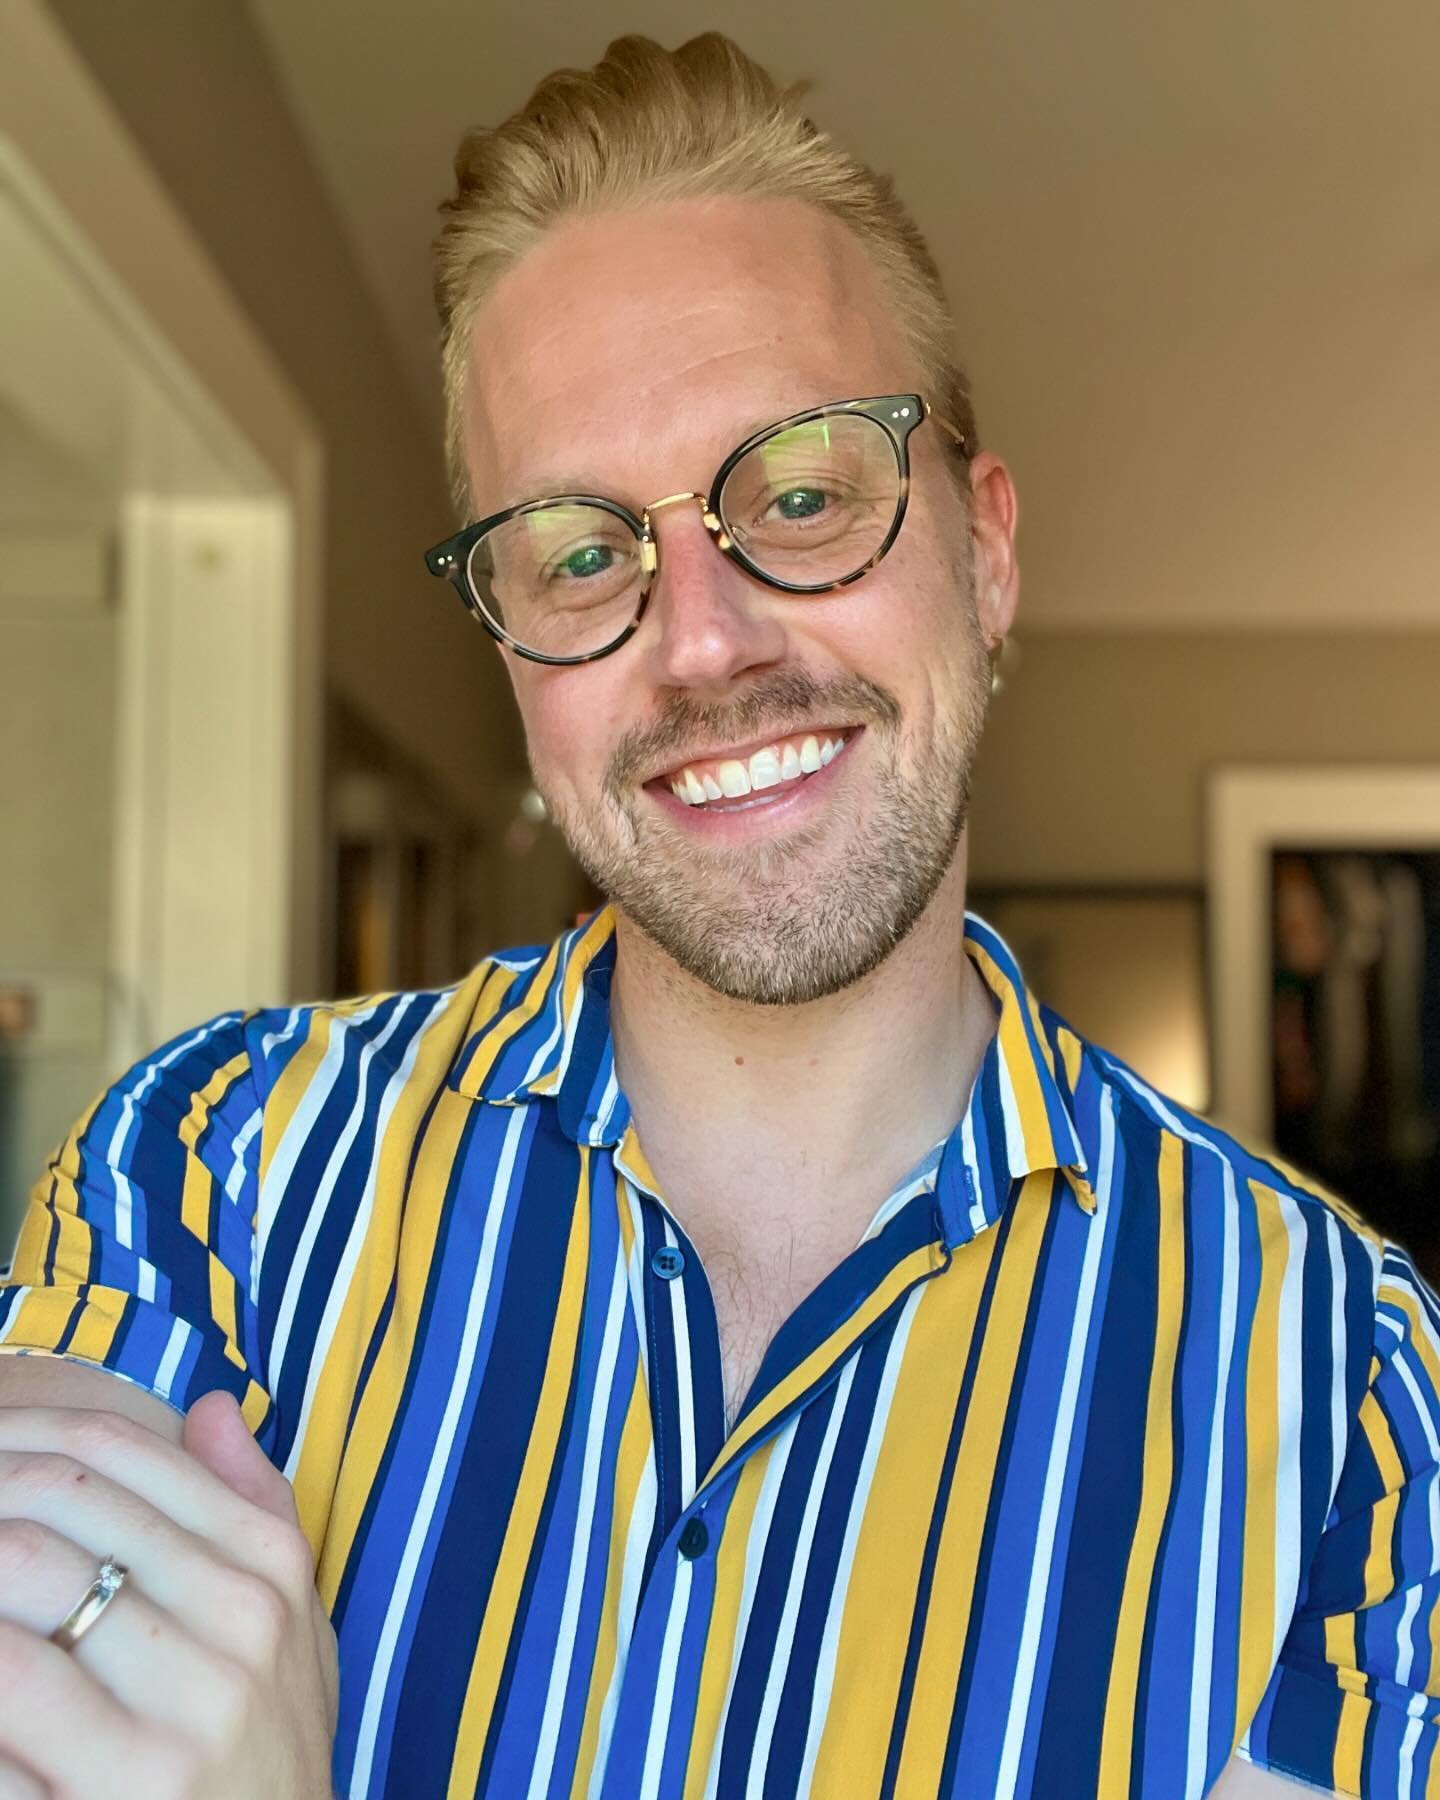 New glasses just dropped! Just call me four eyes!

#gay #glasses #warbyparker #lgbtq